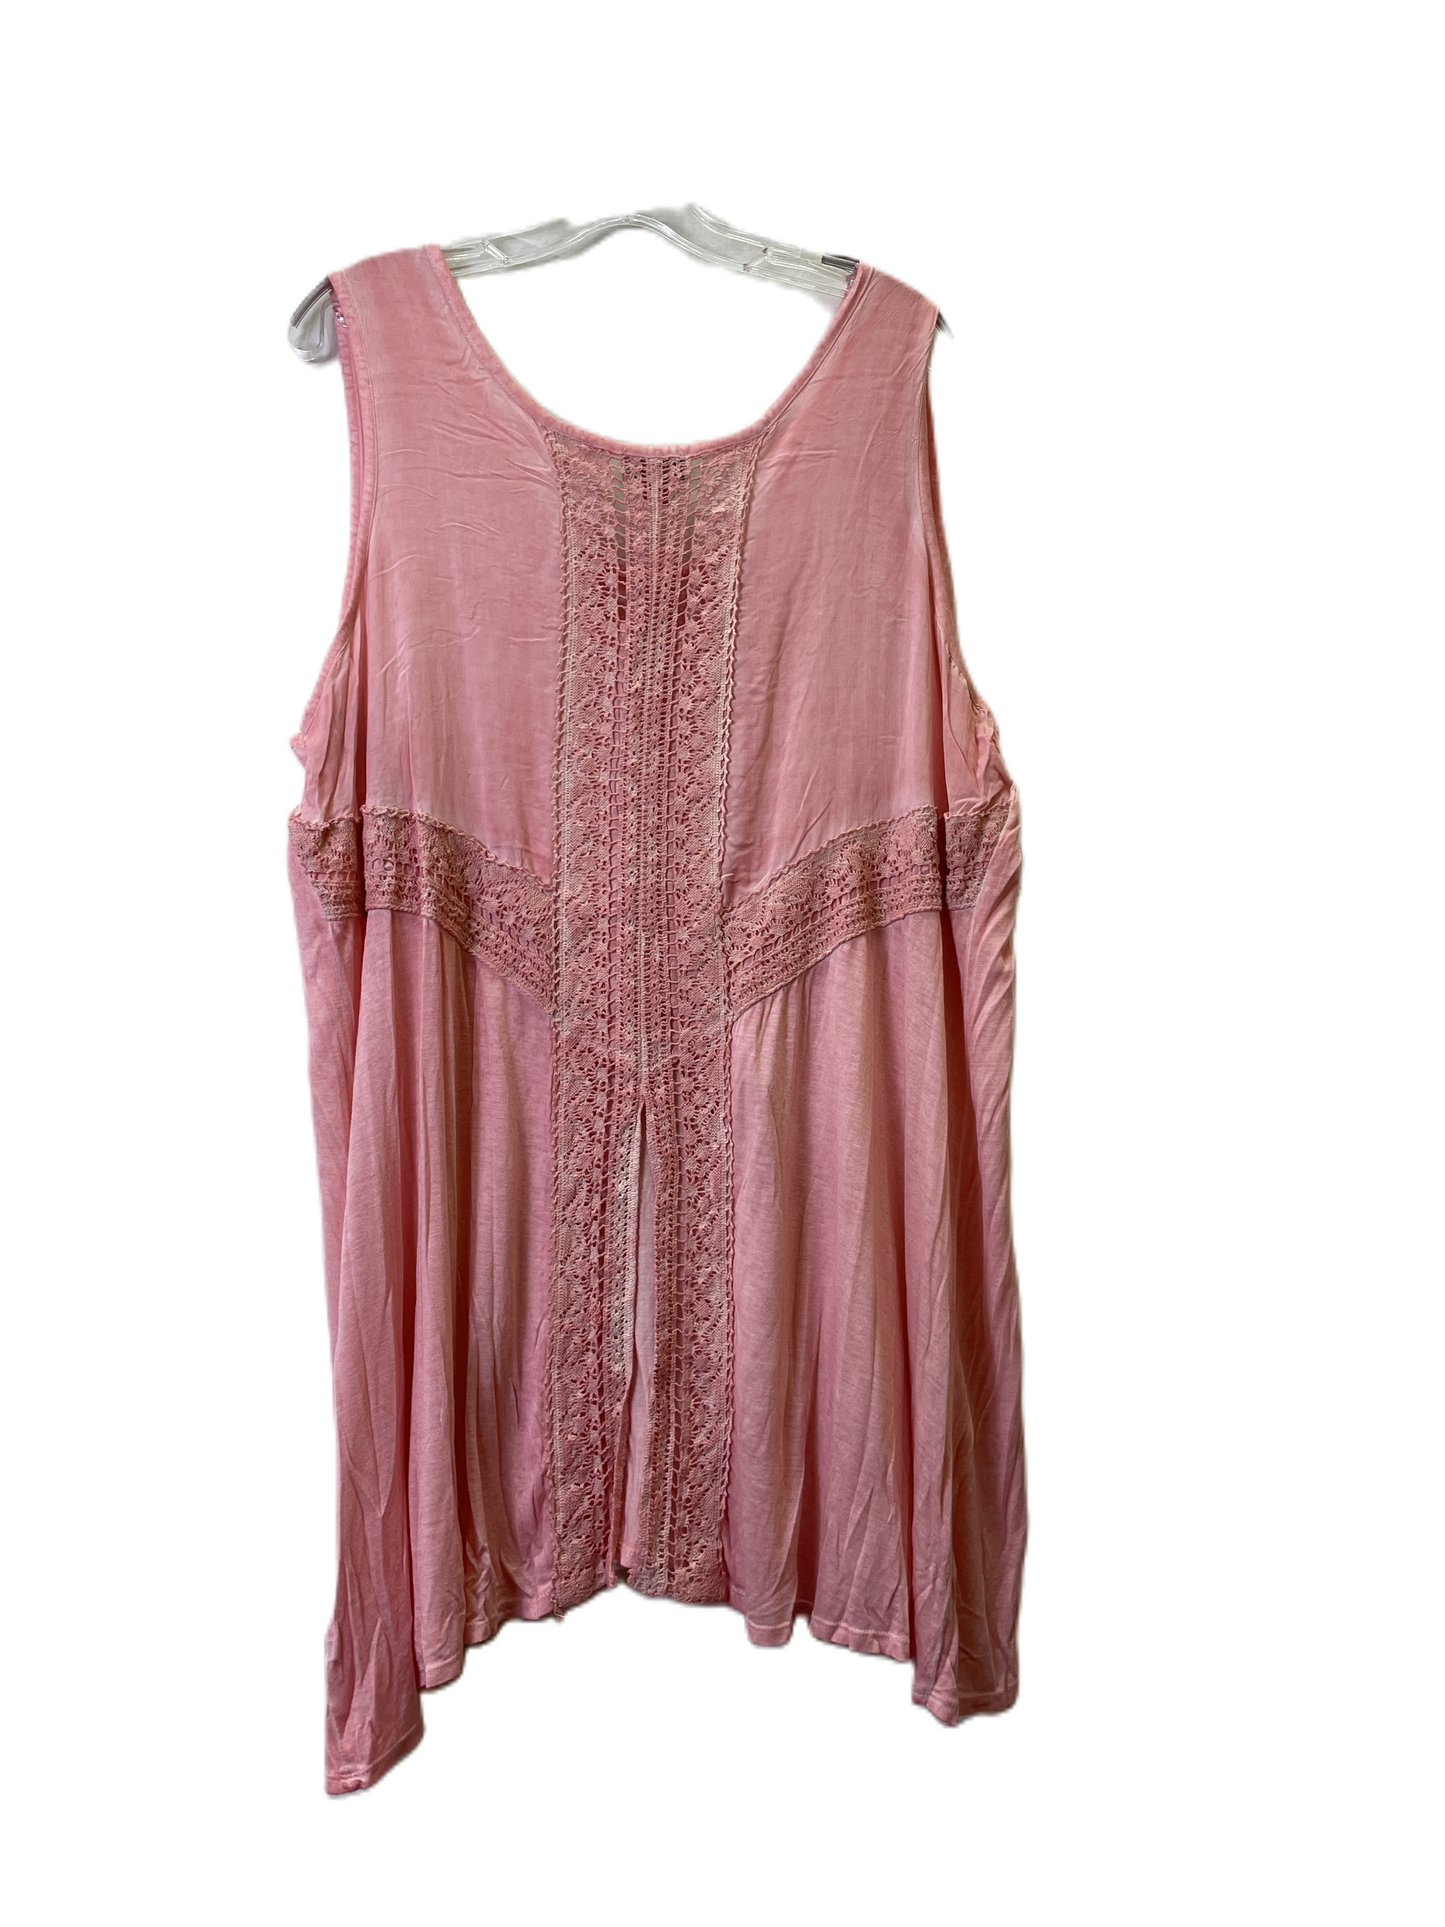 Pink Top Short Sleeve By Live And Let Live, Size: 2x